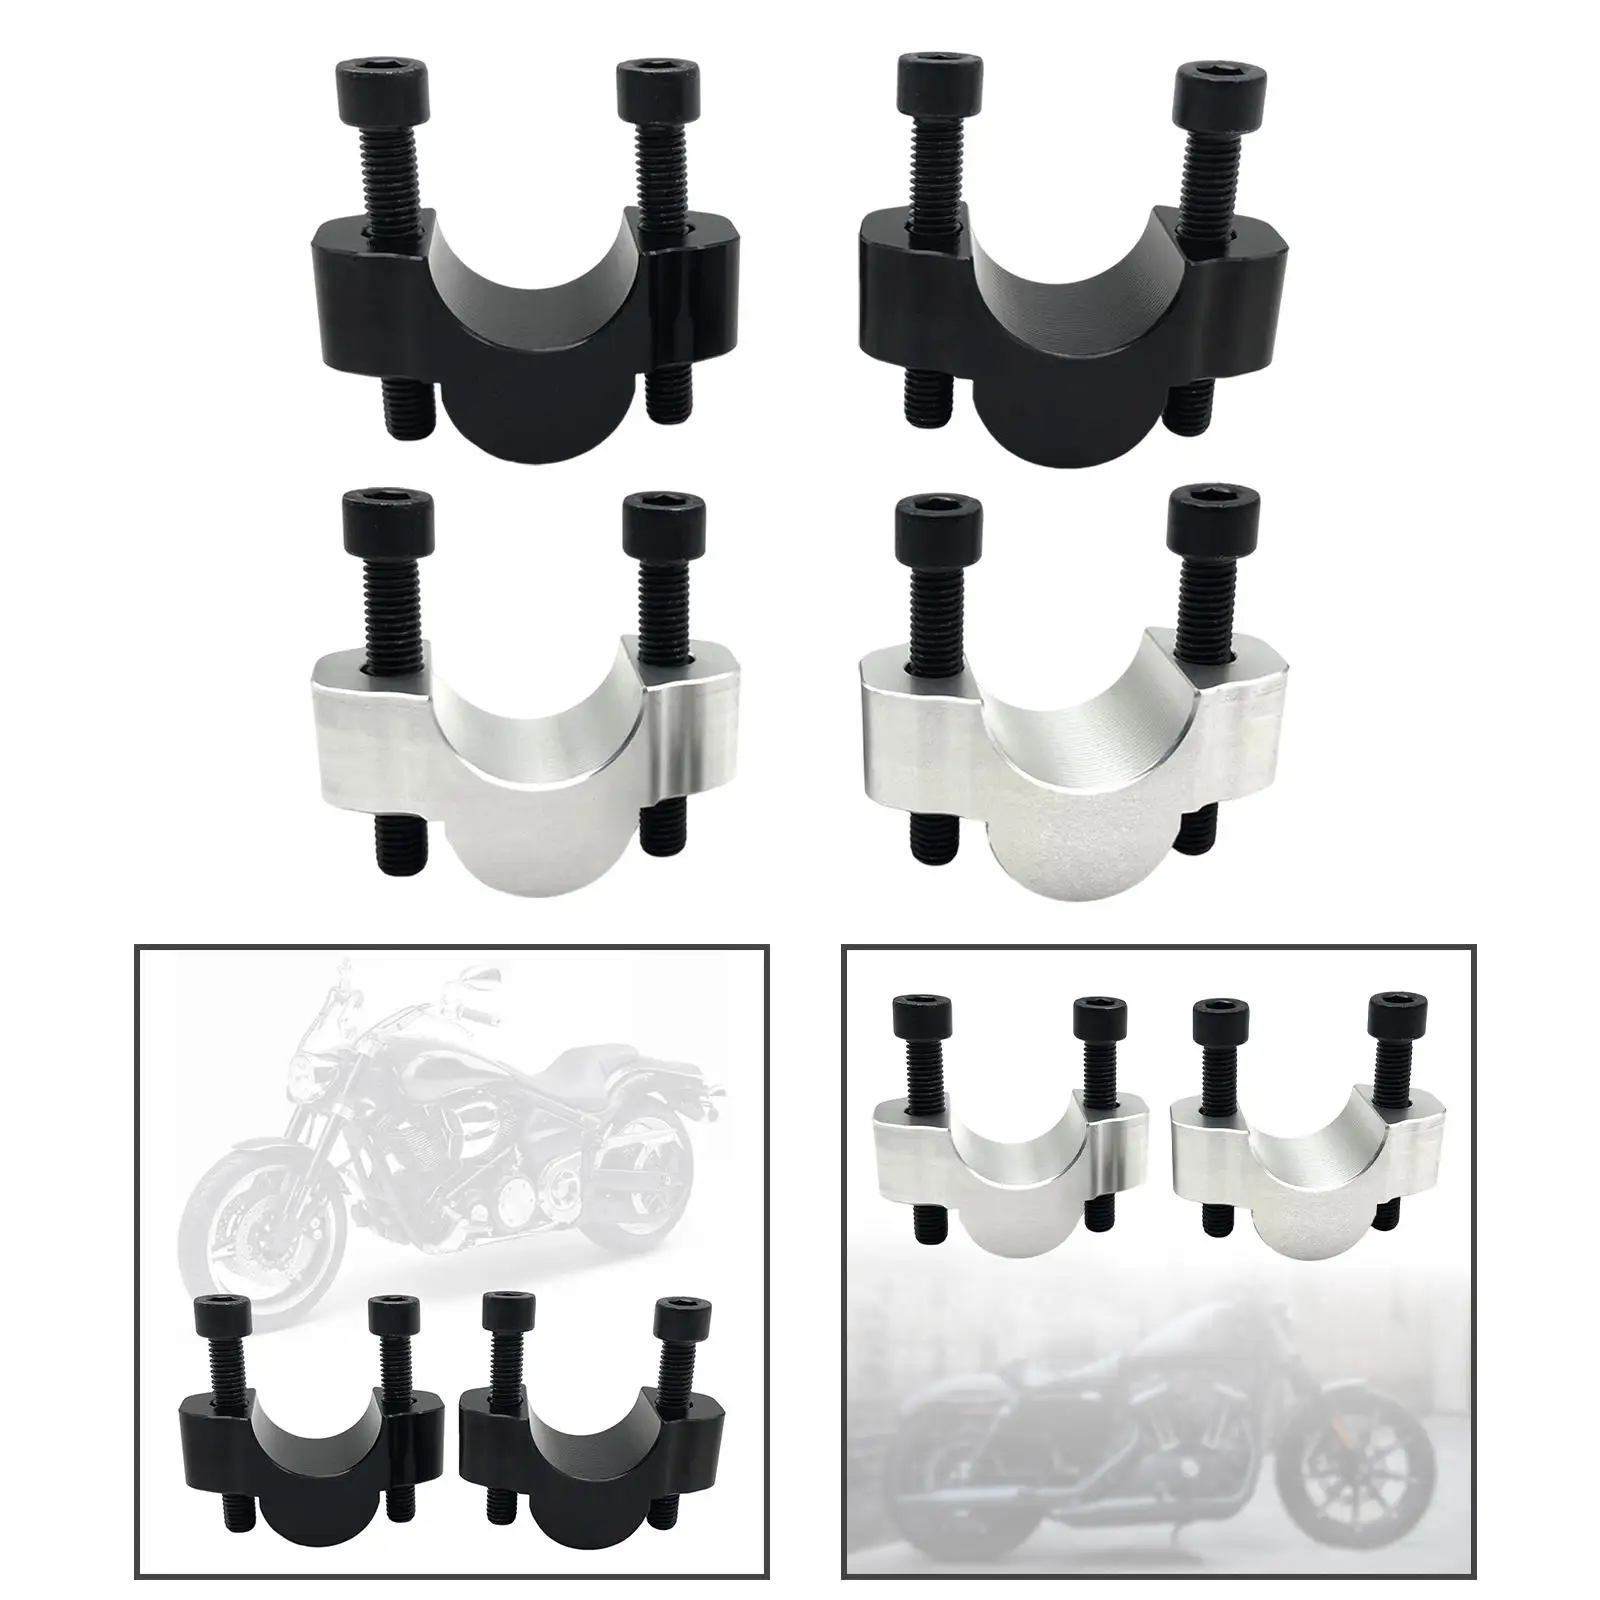 2x Handlebar Risers Aluminum 20mm Spare Parts Increase Motorcycle Handlebar Height Mount Clamp for Tenere700 2019-2023